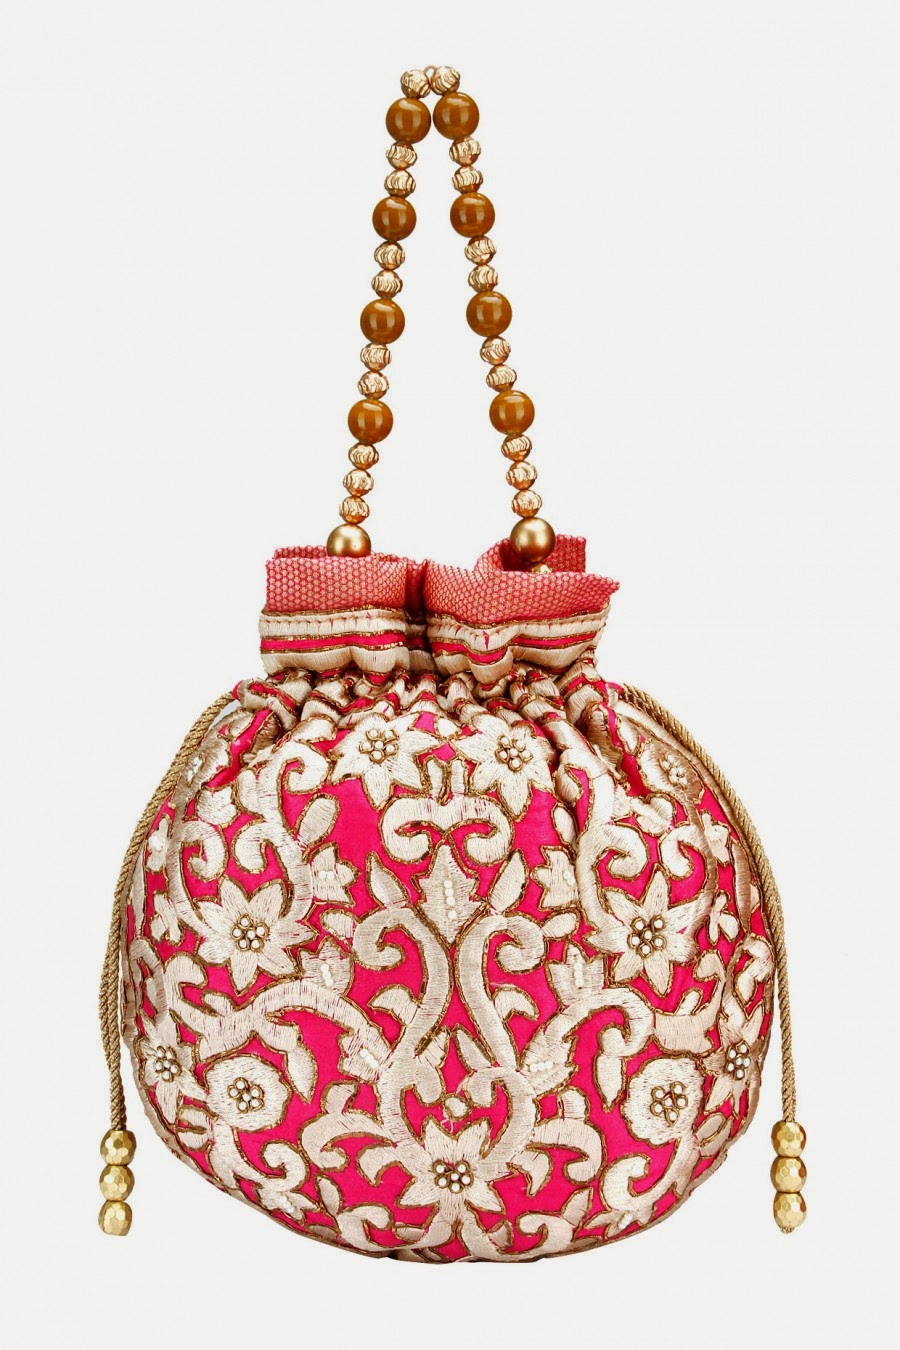 1000+ images about potli on Pinterest | Bags, Clutches and Indian